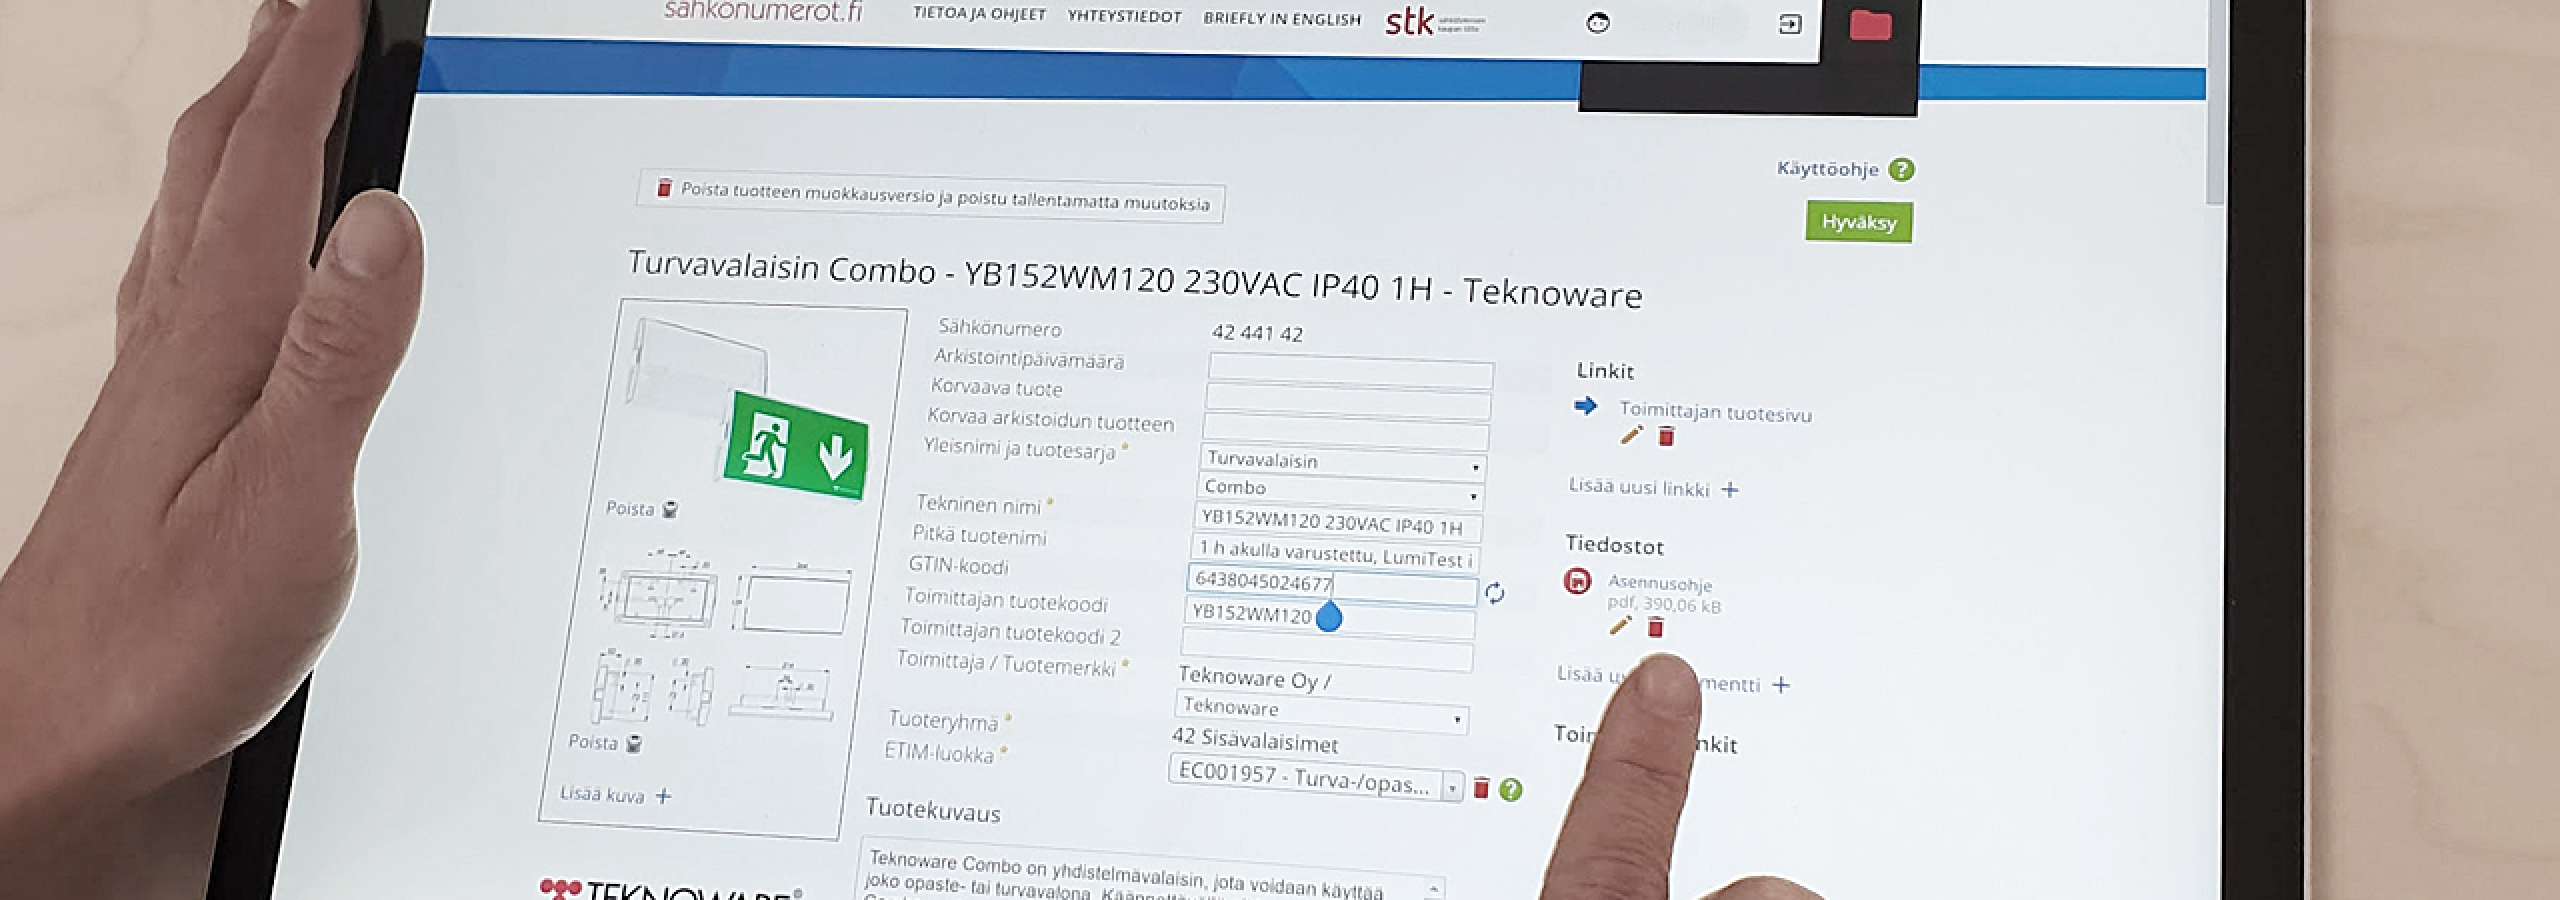 TEKNOWARE IS THE BEST UPDATER OF PRODUCT DATA AMONG EMERGENCY LIGHTING COMPANIES 